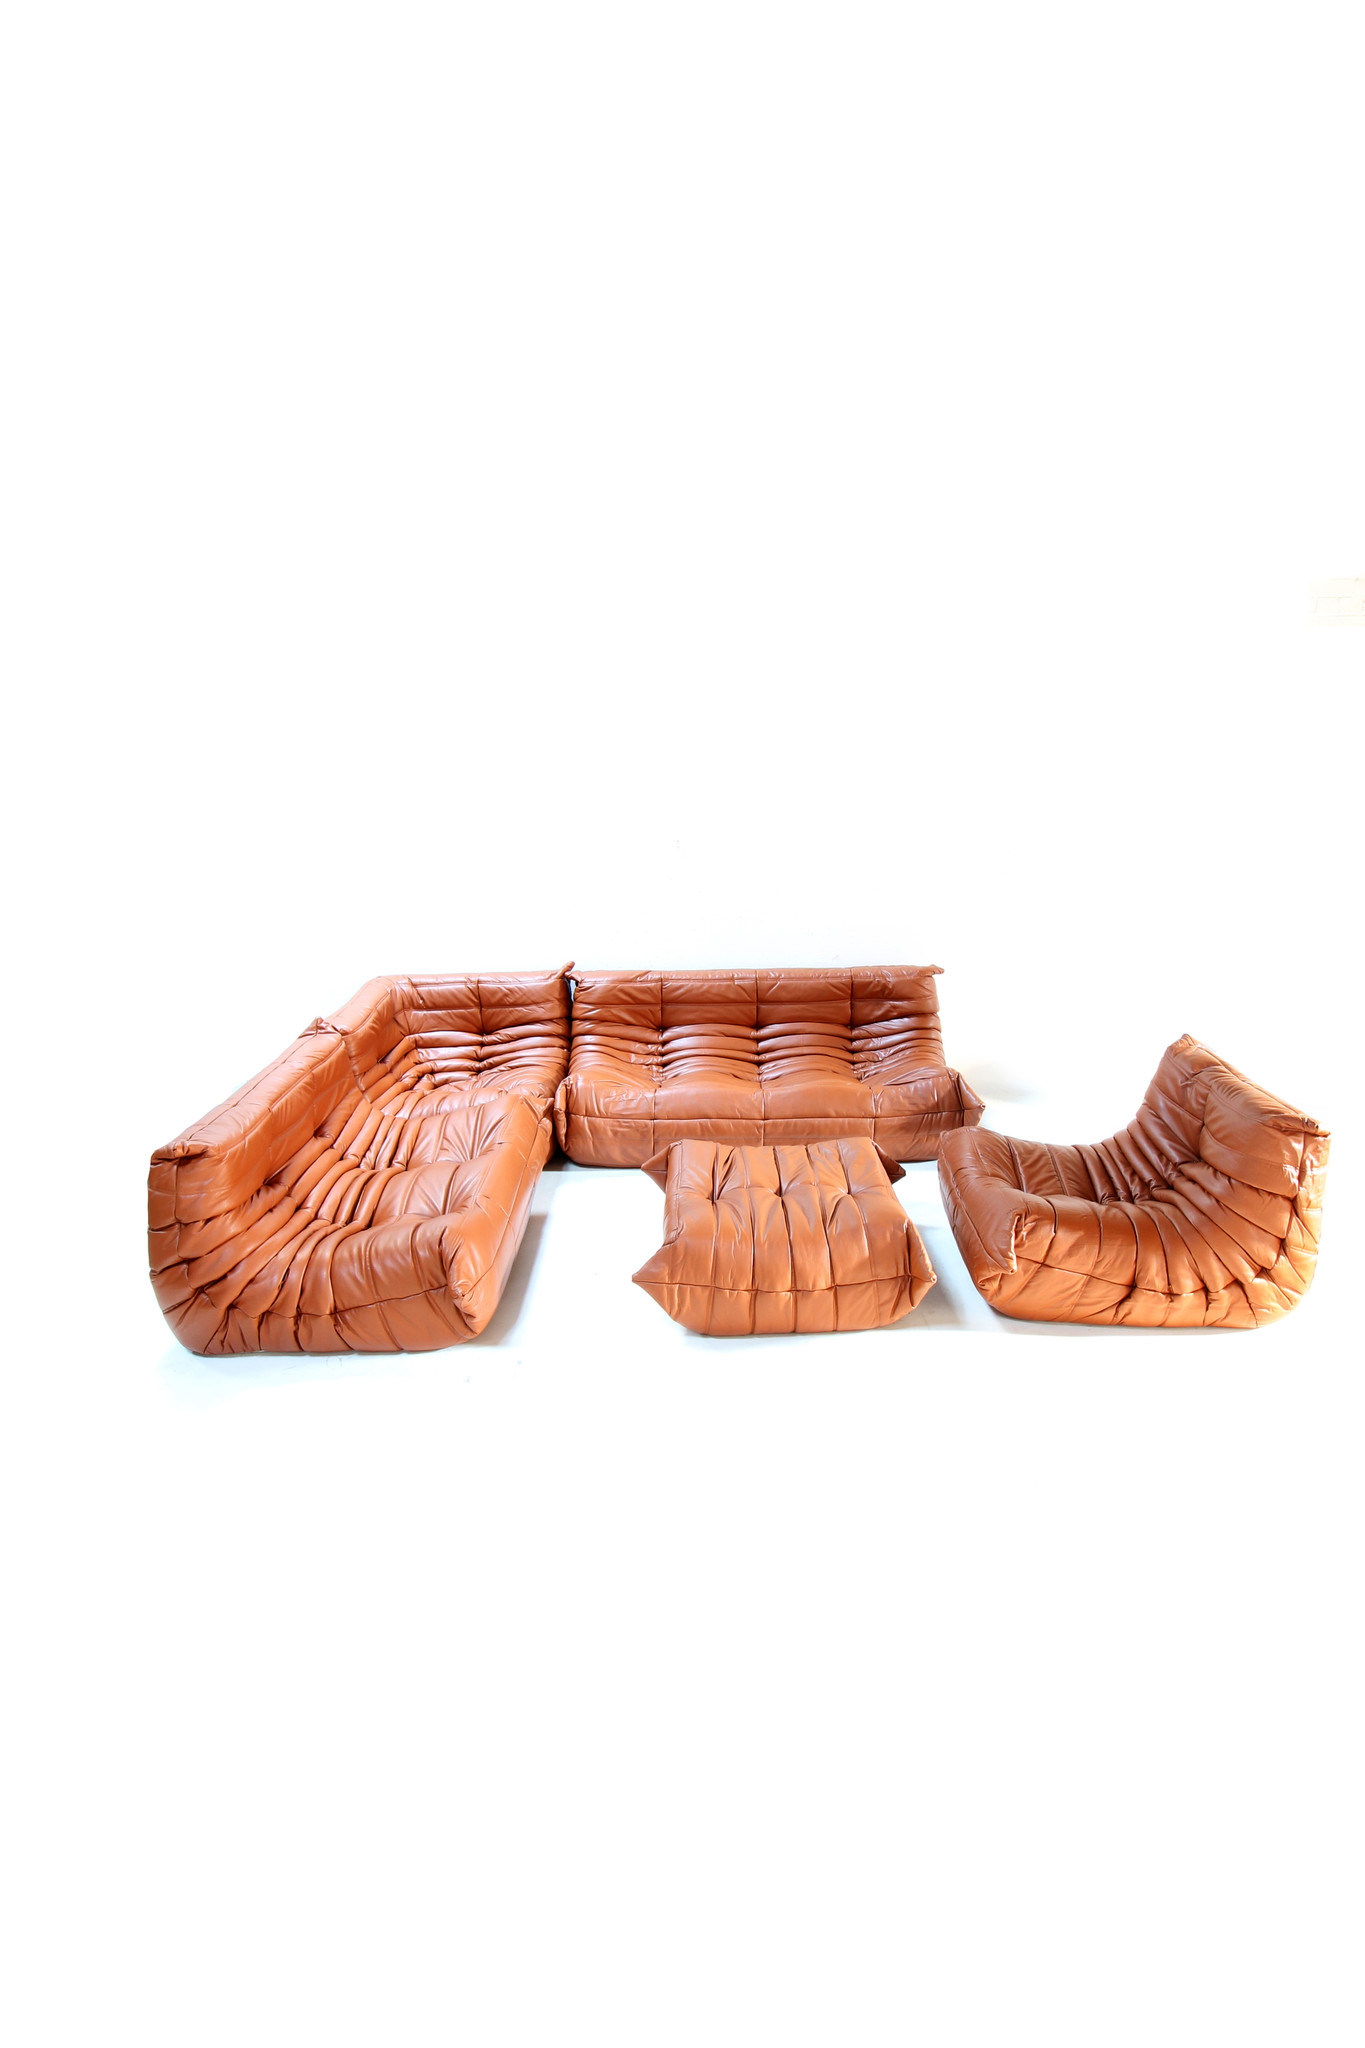 Ligne roset togo in cognac leather - THE HOUSE OF WAUW